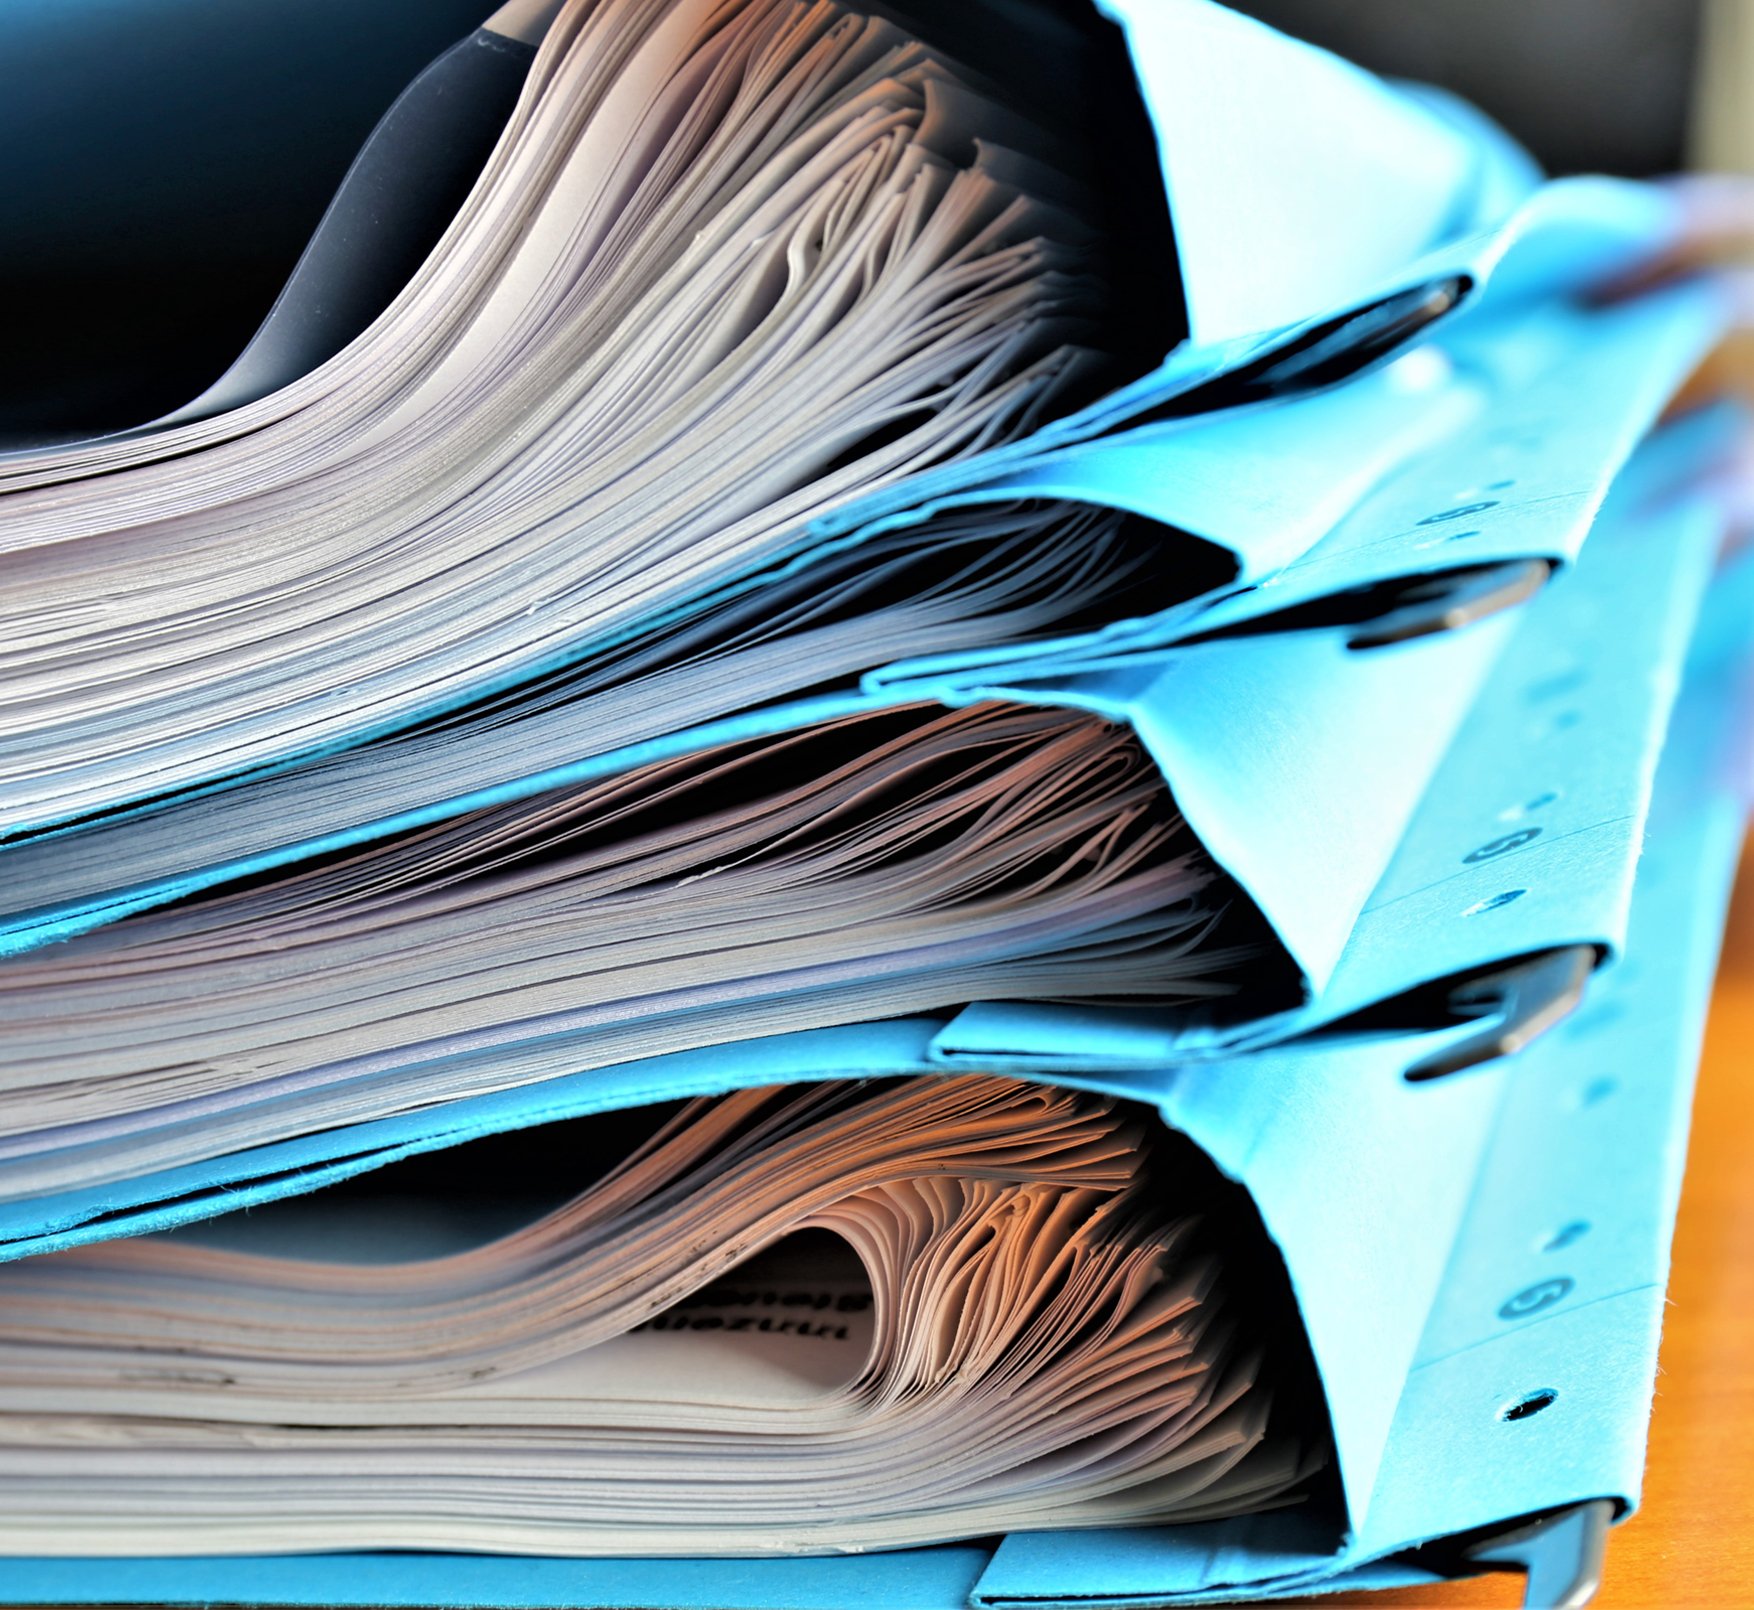 TAKE ON PAPER WASTE AND PRINTING COSTS